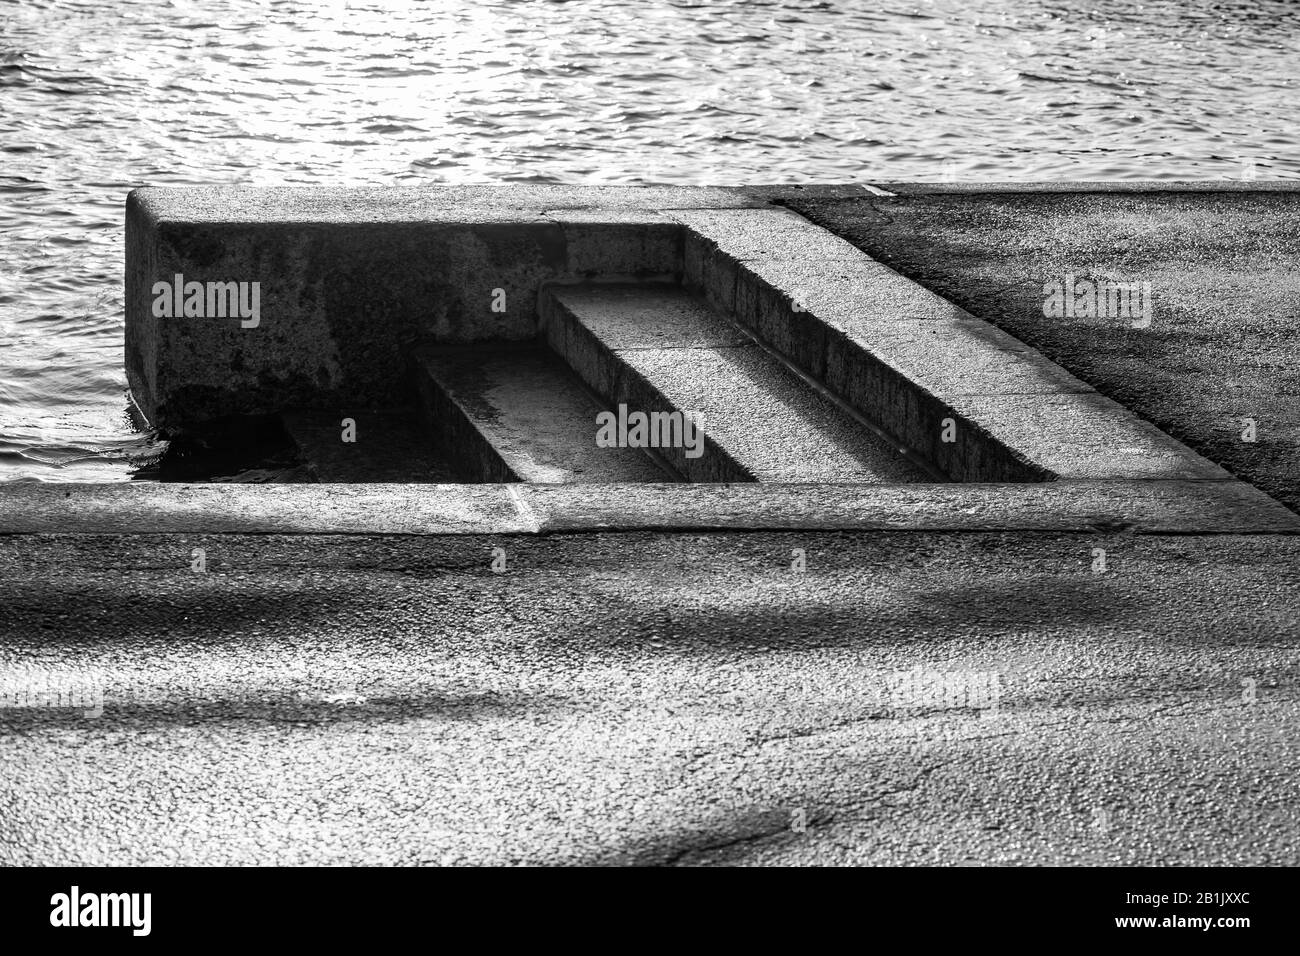 Dark wet granite stairs goes down to river water. Black and white abstract architectural photo background. St. Petersburg, Russia Stock Photo